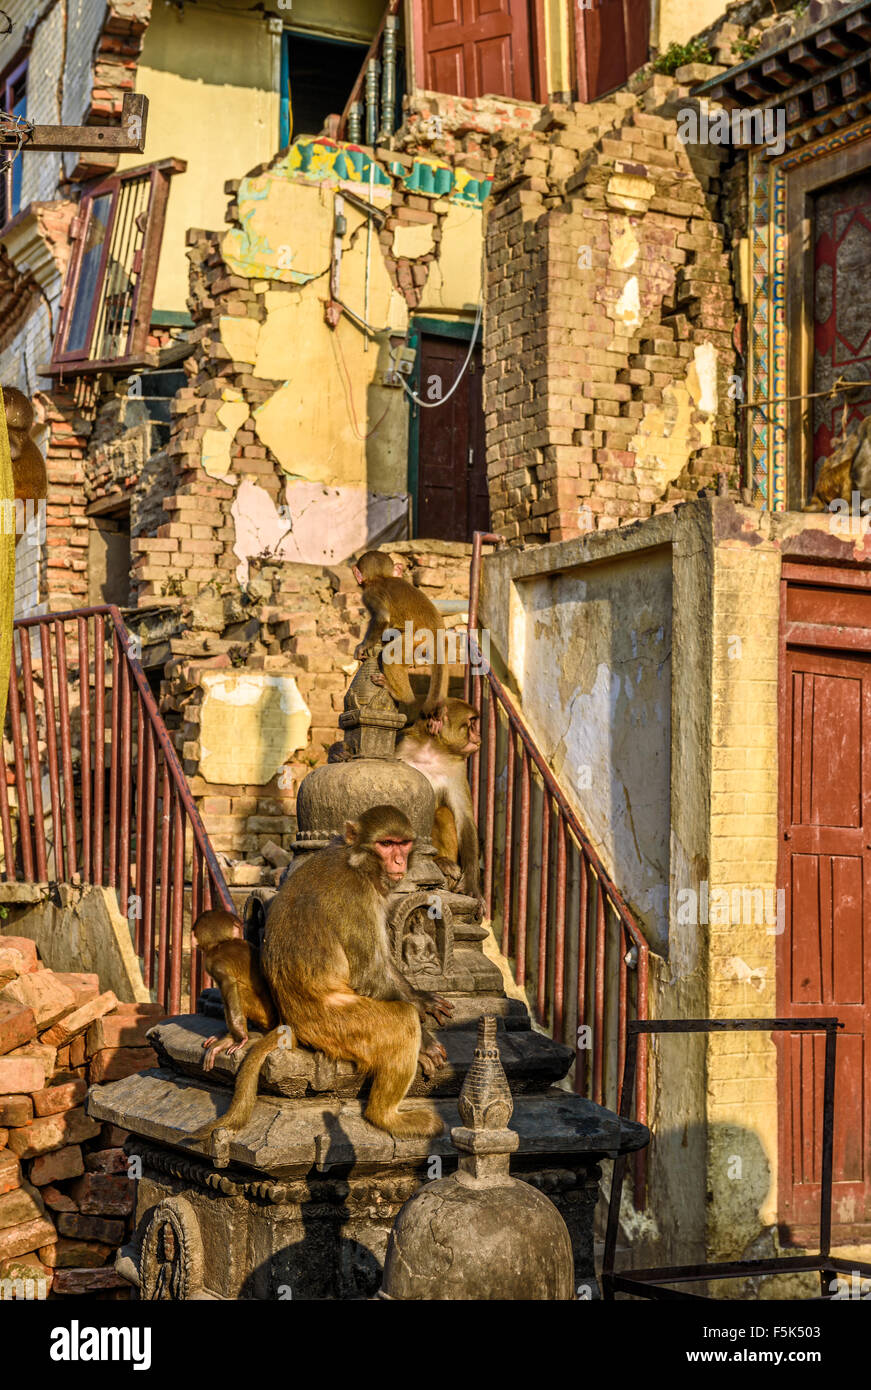 Monkeys playing in ruins of the Swayambhunath temple damaged after the major earthquake on 25 April 2015 in Kathmandu, Nepal Stock Photo